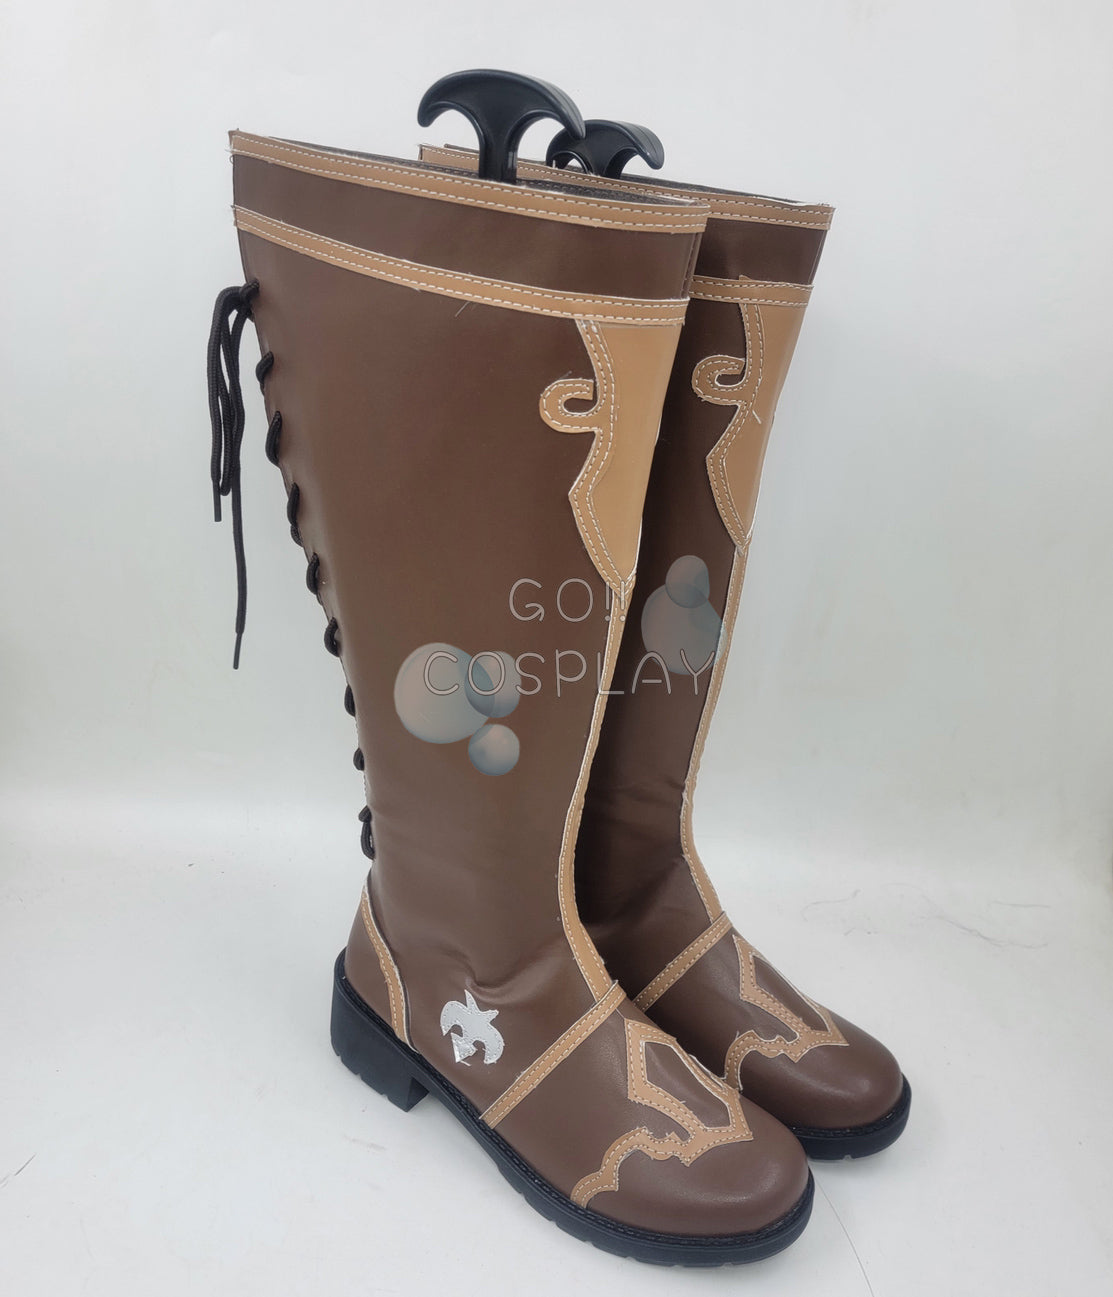 Final Fantasy XIV Cleric's Boots Cosplay